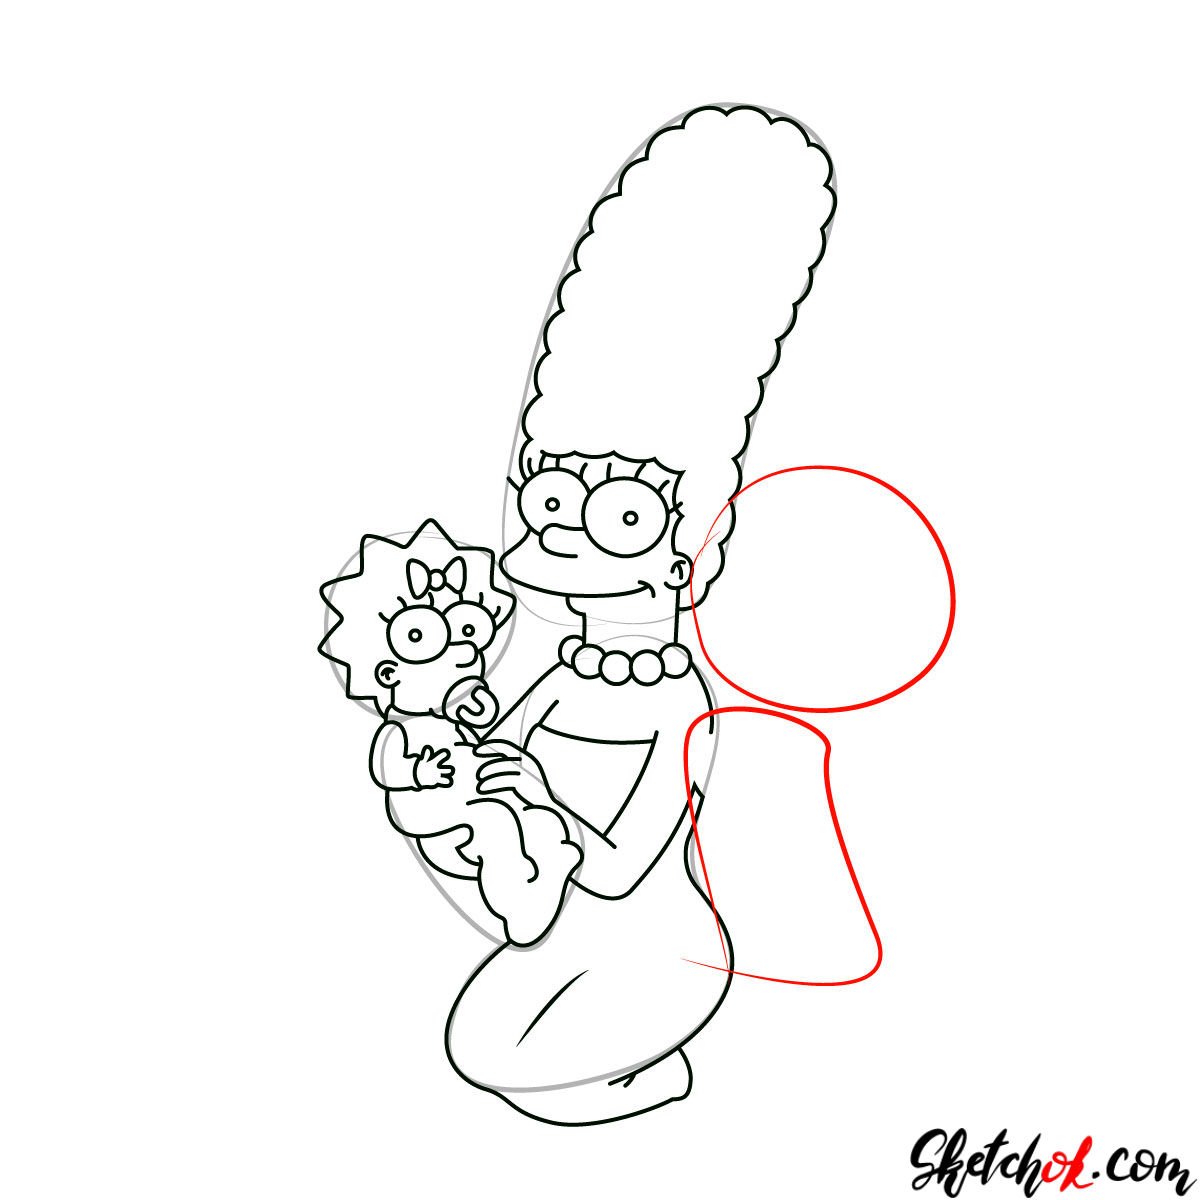 How to draw the Simpsons family together Sketchok easy